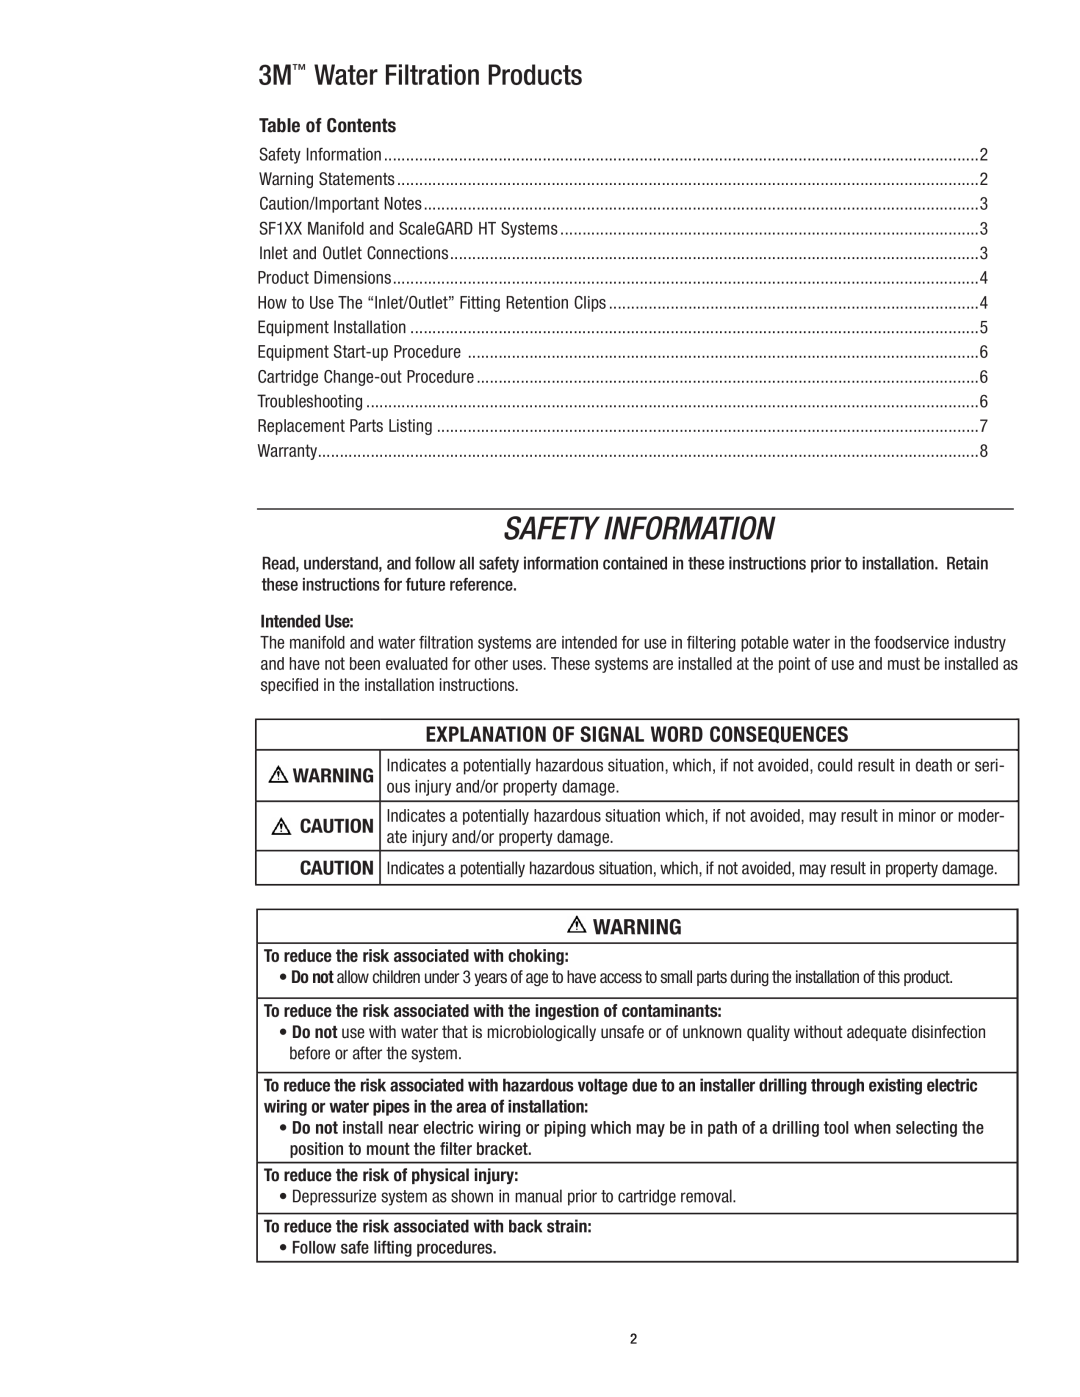 3M SF1XX 3M Water Filtration Products, Explanation Of Signal Word Consequences, Table of Contents, Safety Information 